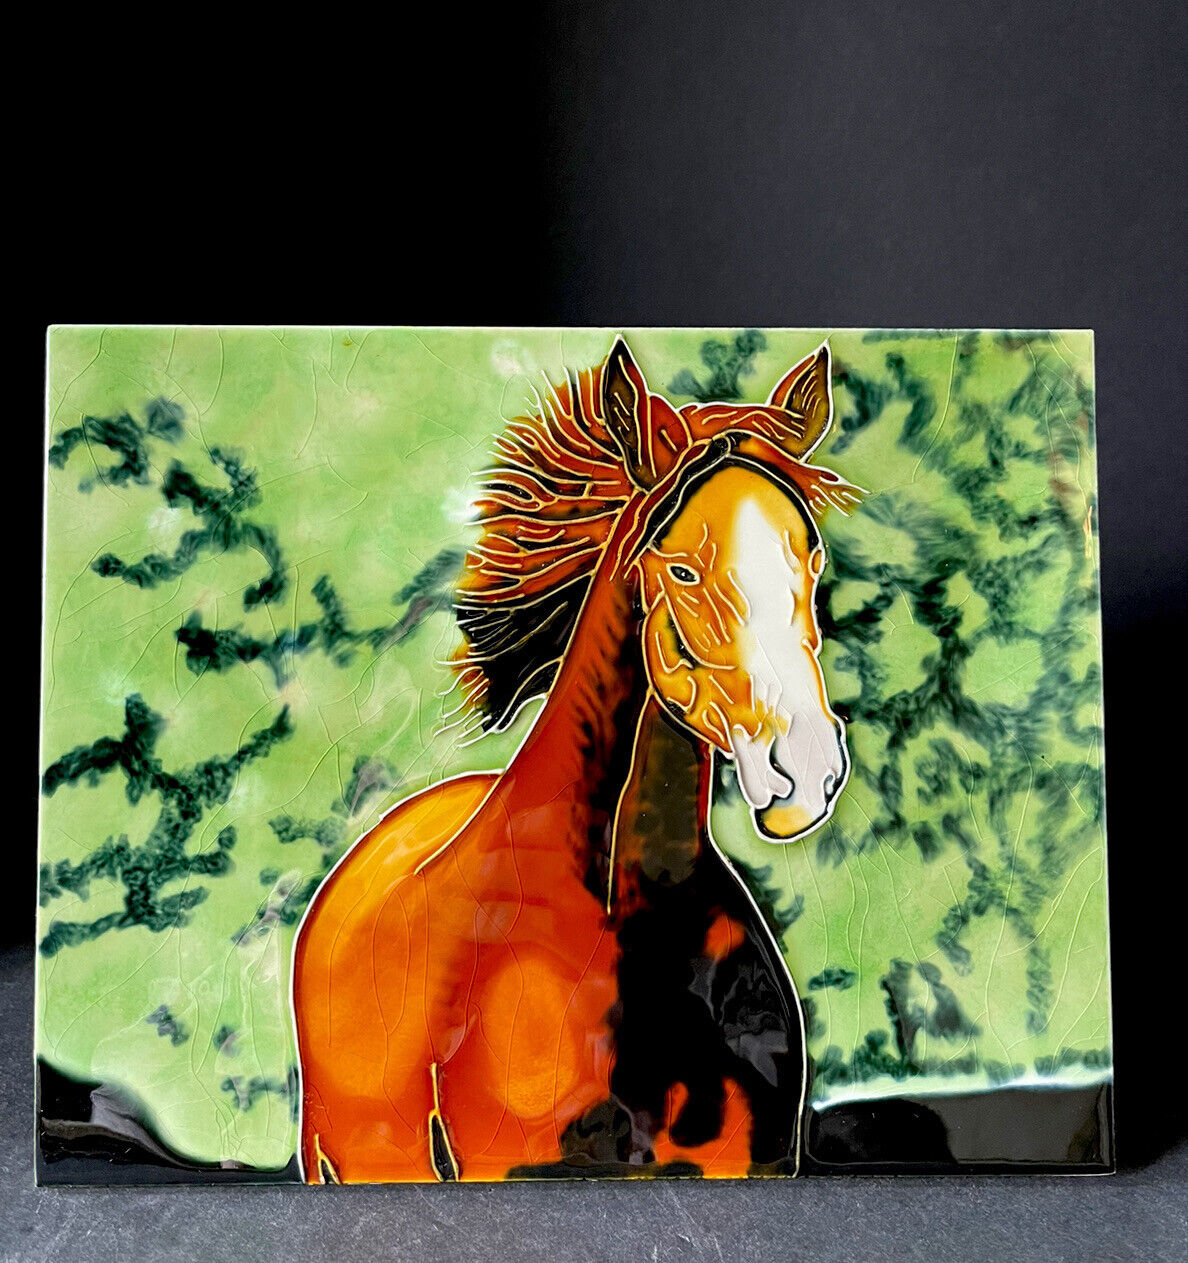 Wild Horse Running Decorative Ceramic TileArt Table top or Hangable Wall Decor